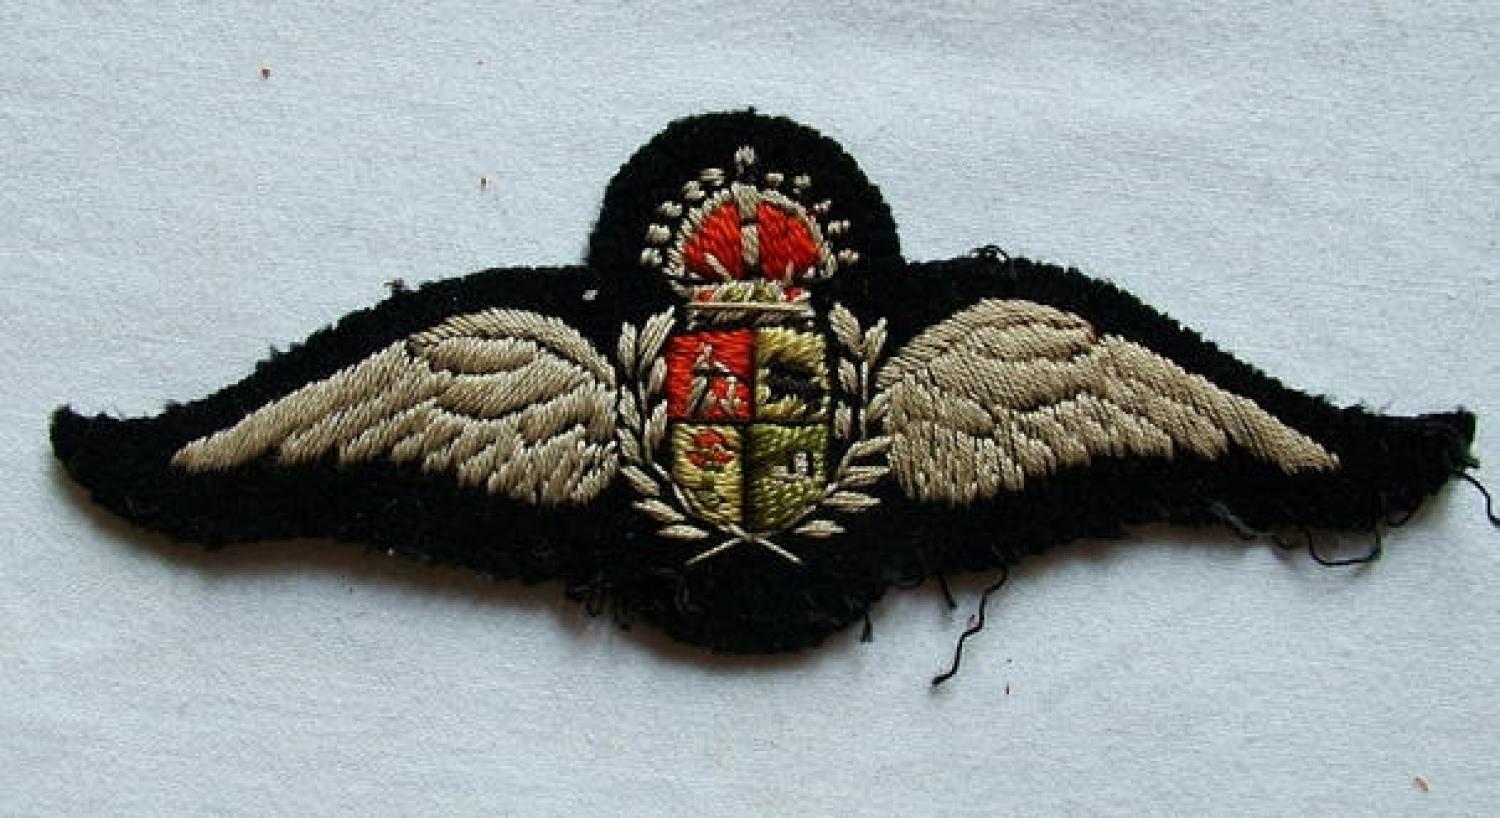 South African Air Force Pilot Wing